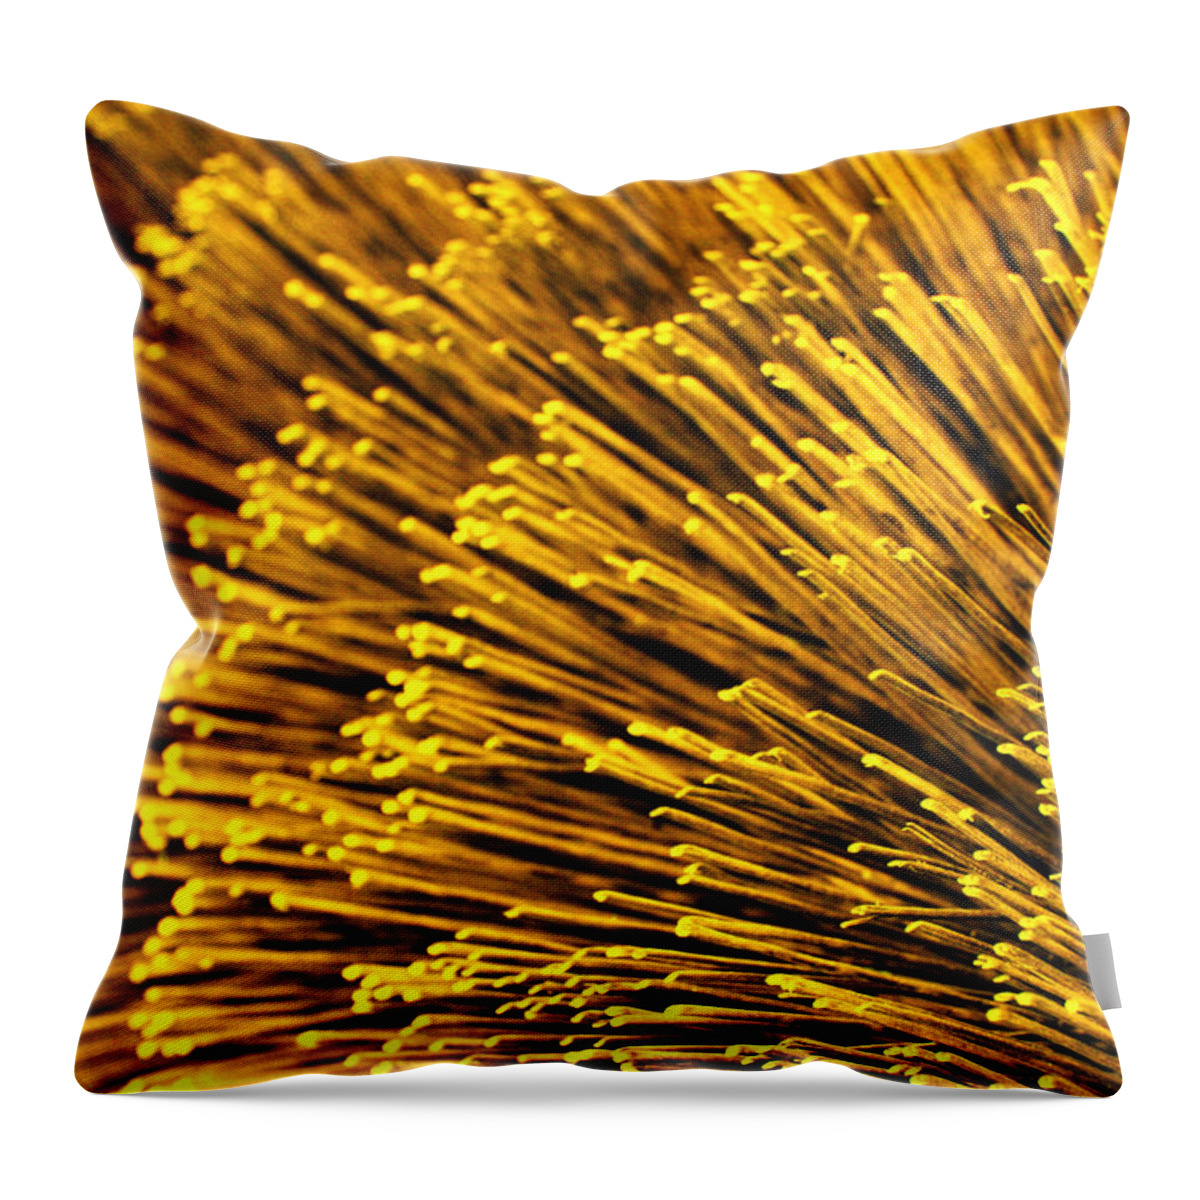 Bristles Throw Pillow featuring the photograph Yellow Bristles by Robert Woodward